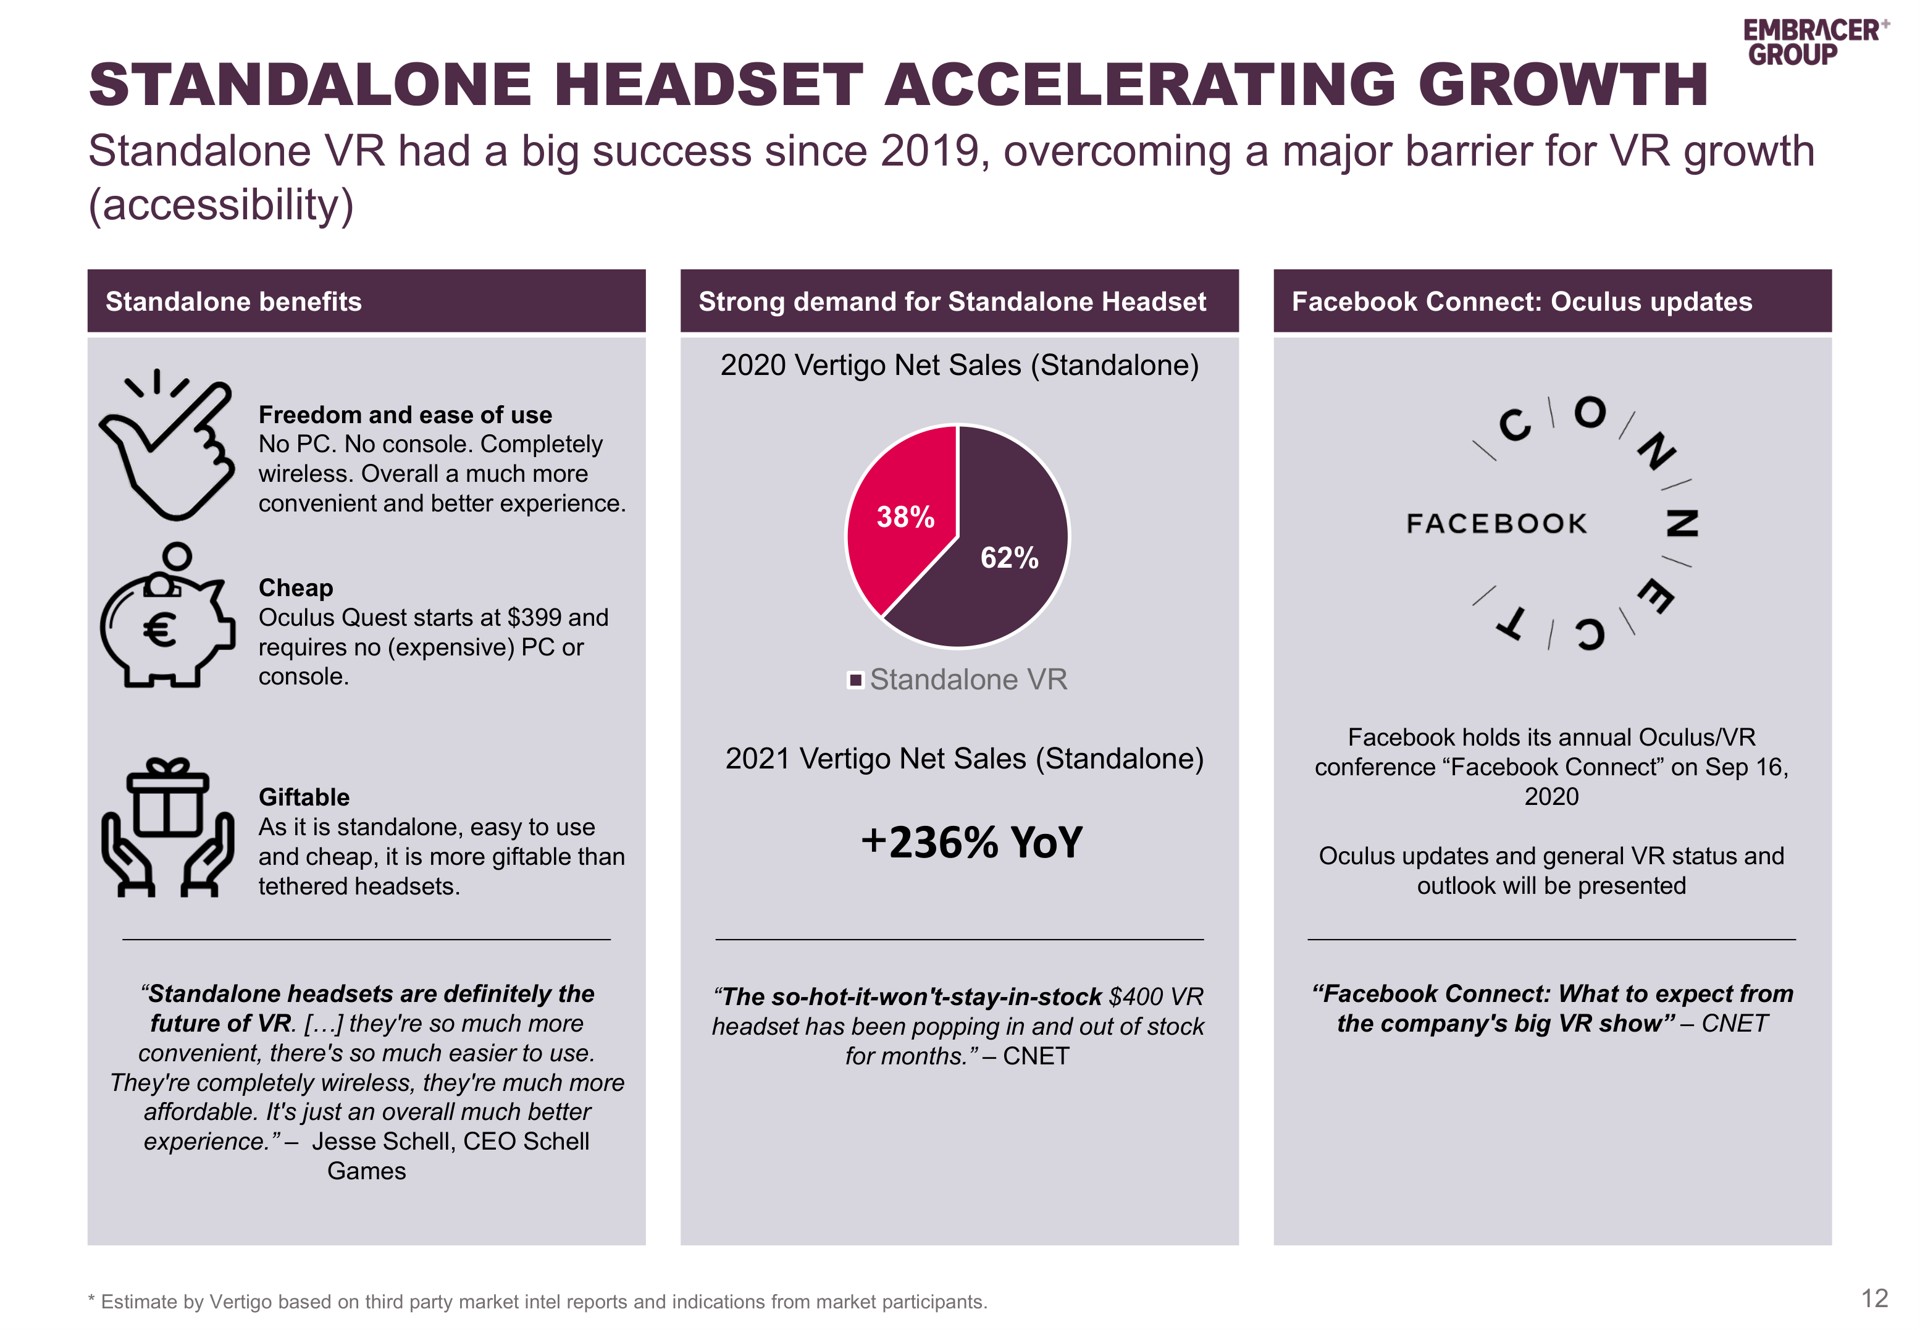 headset accelerating growth yoy | Embracer Group